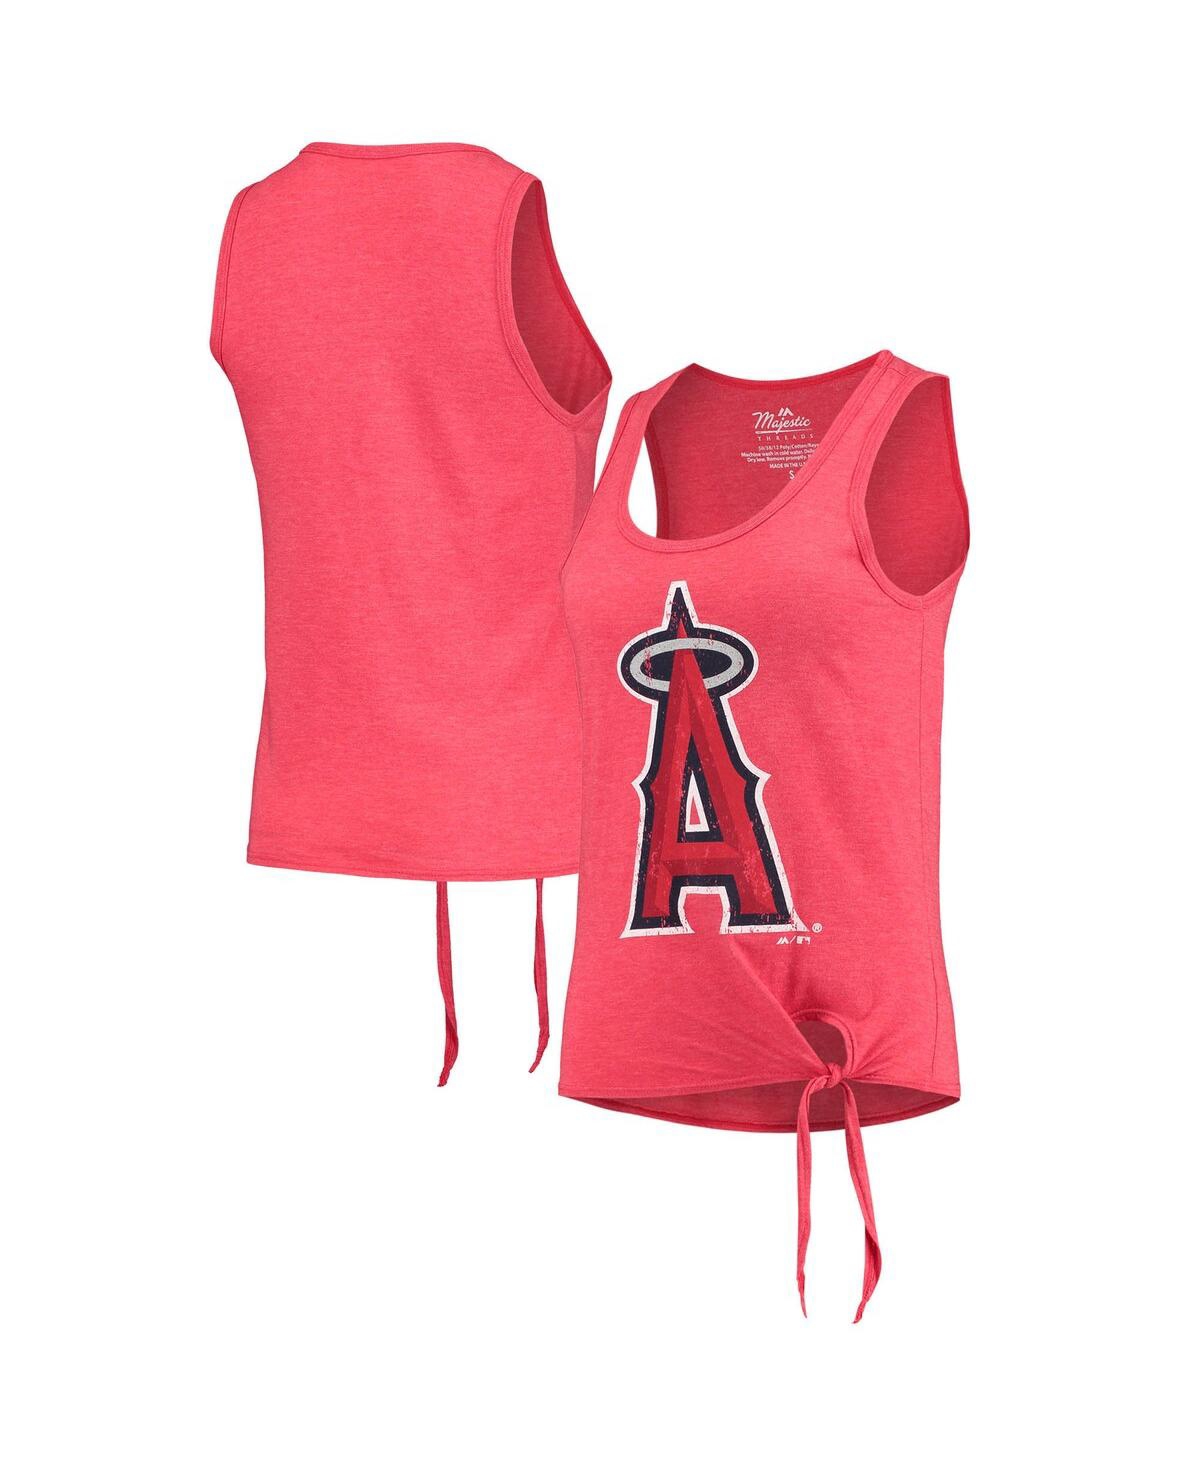 Women's Majestic Threads Red Los Angeles Angels Scoop Neck Racerback Side Tie Tri-Blend Tank Top - Red